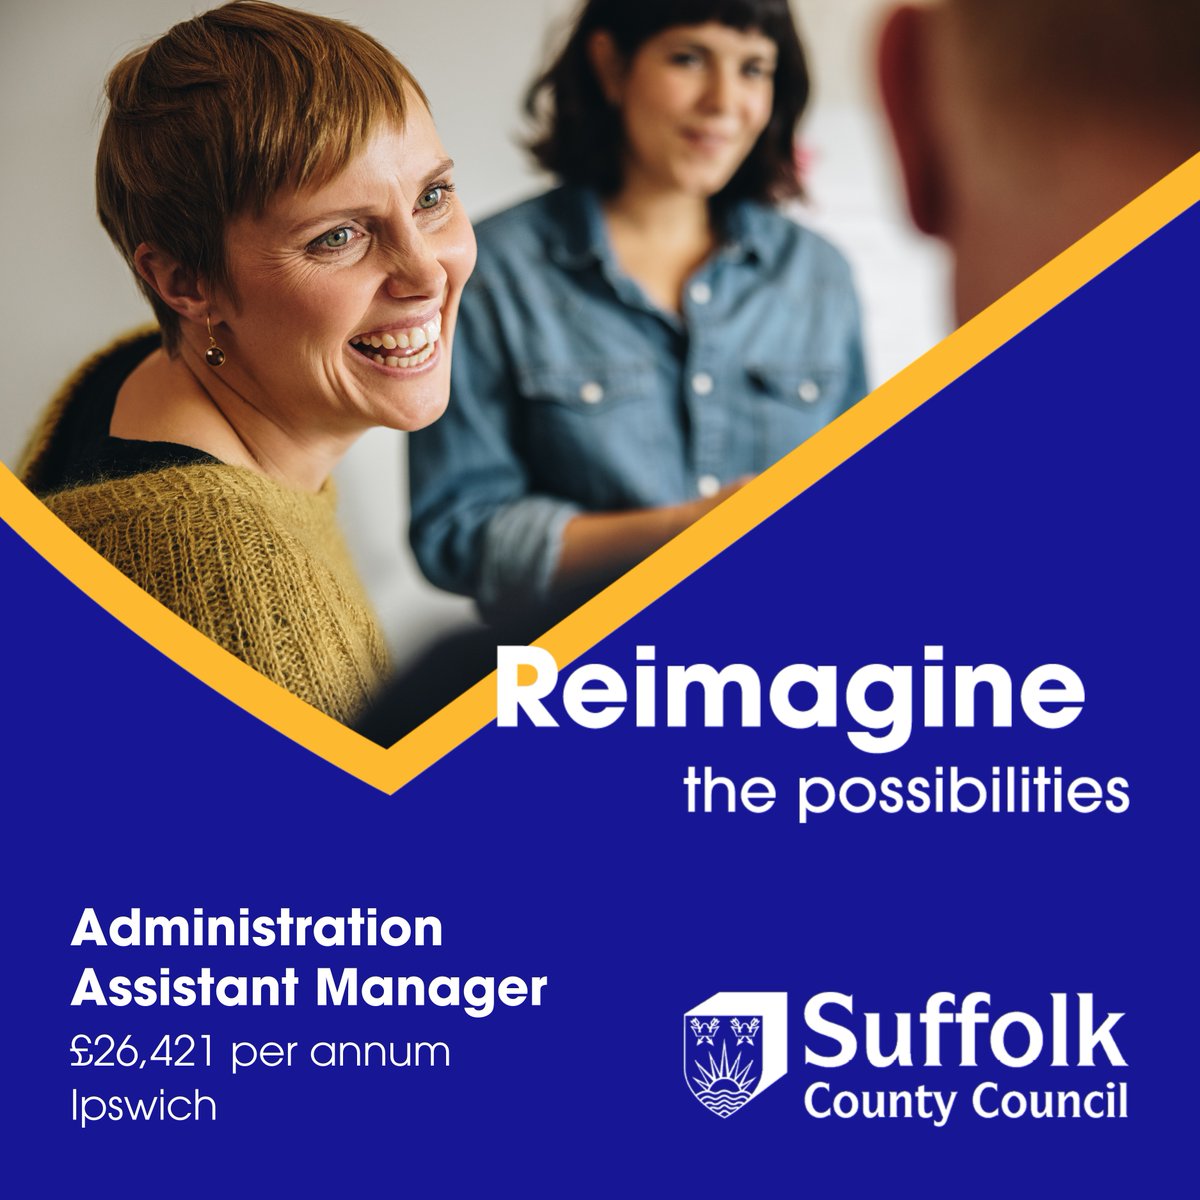 Administration Assistant Manager
@suffolkcc - Ipswich IP1 2BX / Hybrid 
£26,421 pa (pro rata if P/T)
37 hpw, Flexible working options, Permanent

For more info and to apply for this job, please visit:
suffolkjobsdirect.org/#en/sites/CX_1…

#SuffolkJobs #suffolkjobsdirect